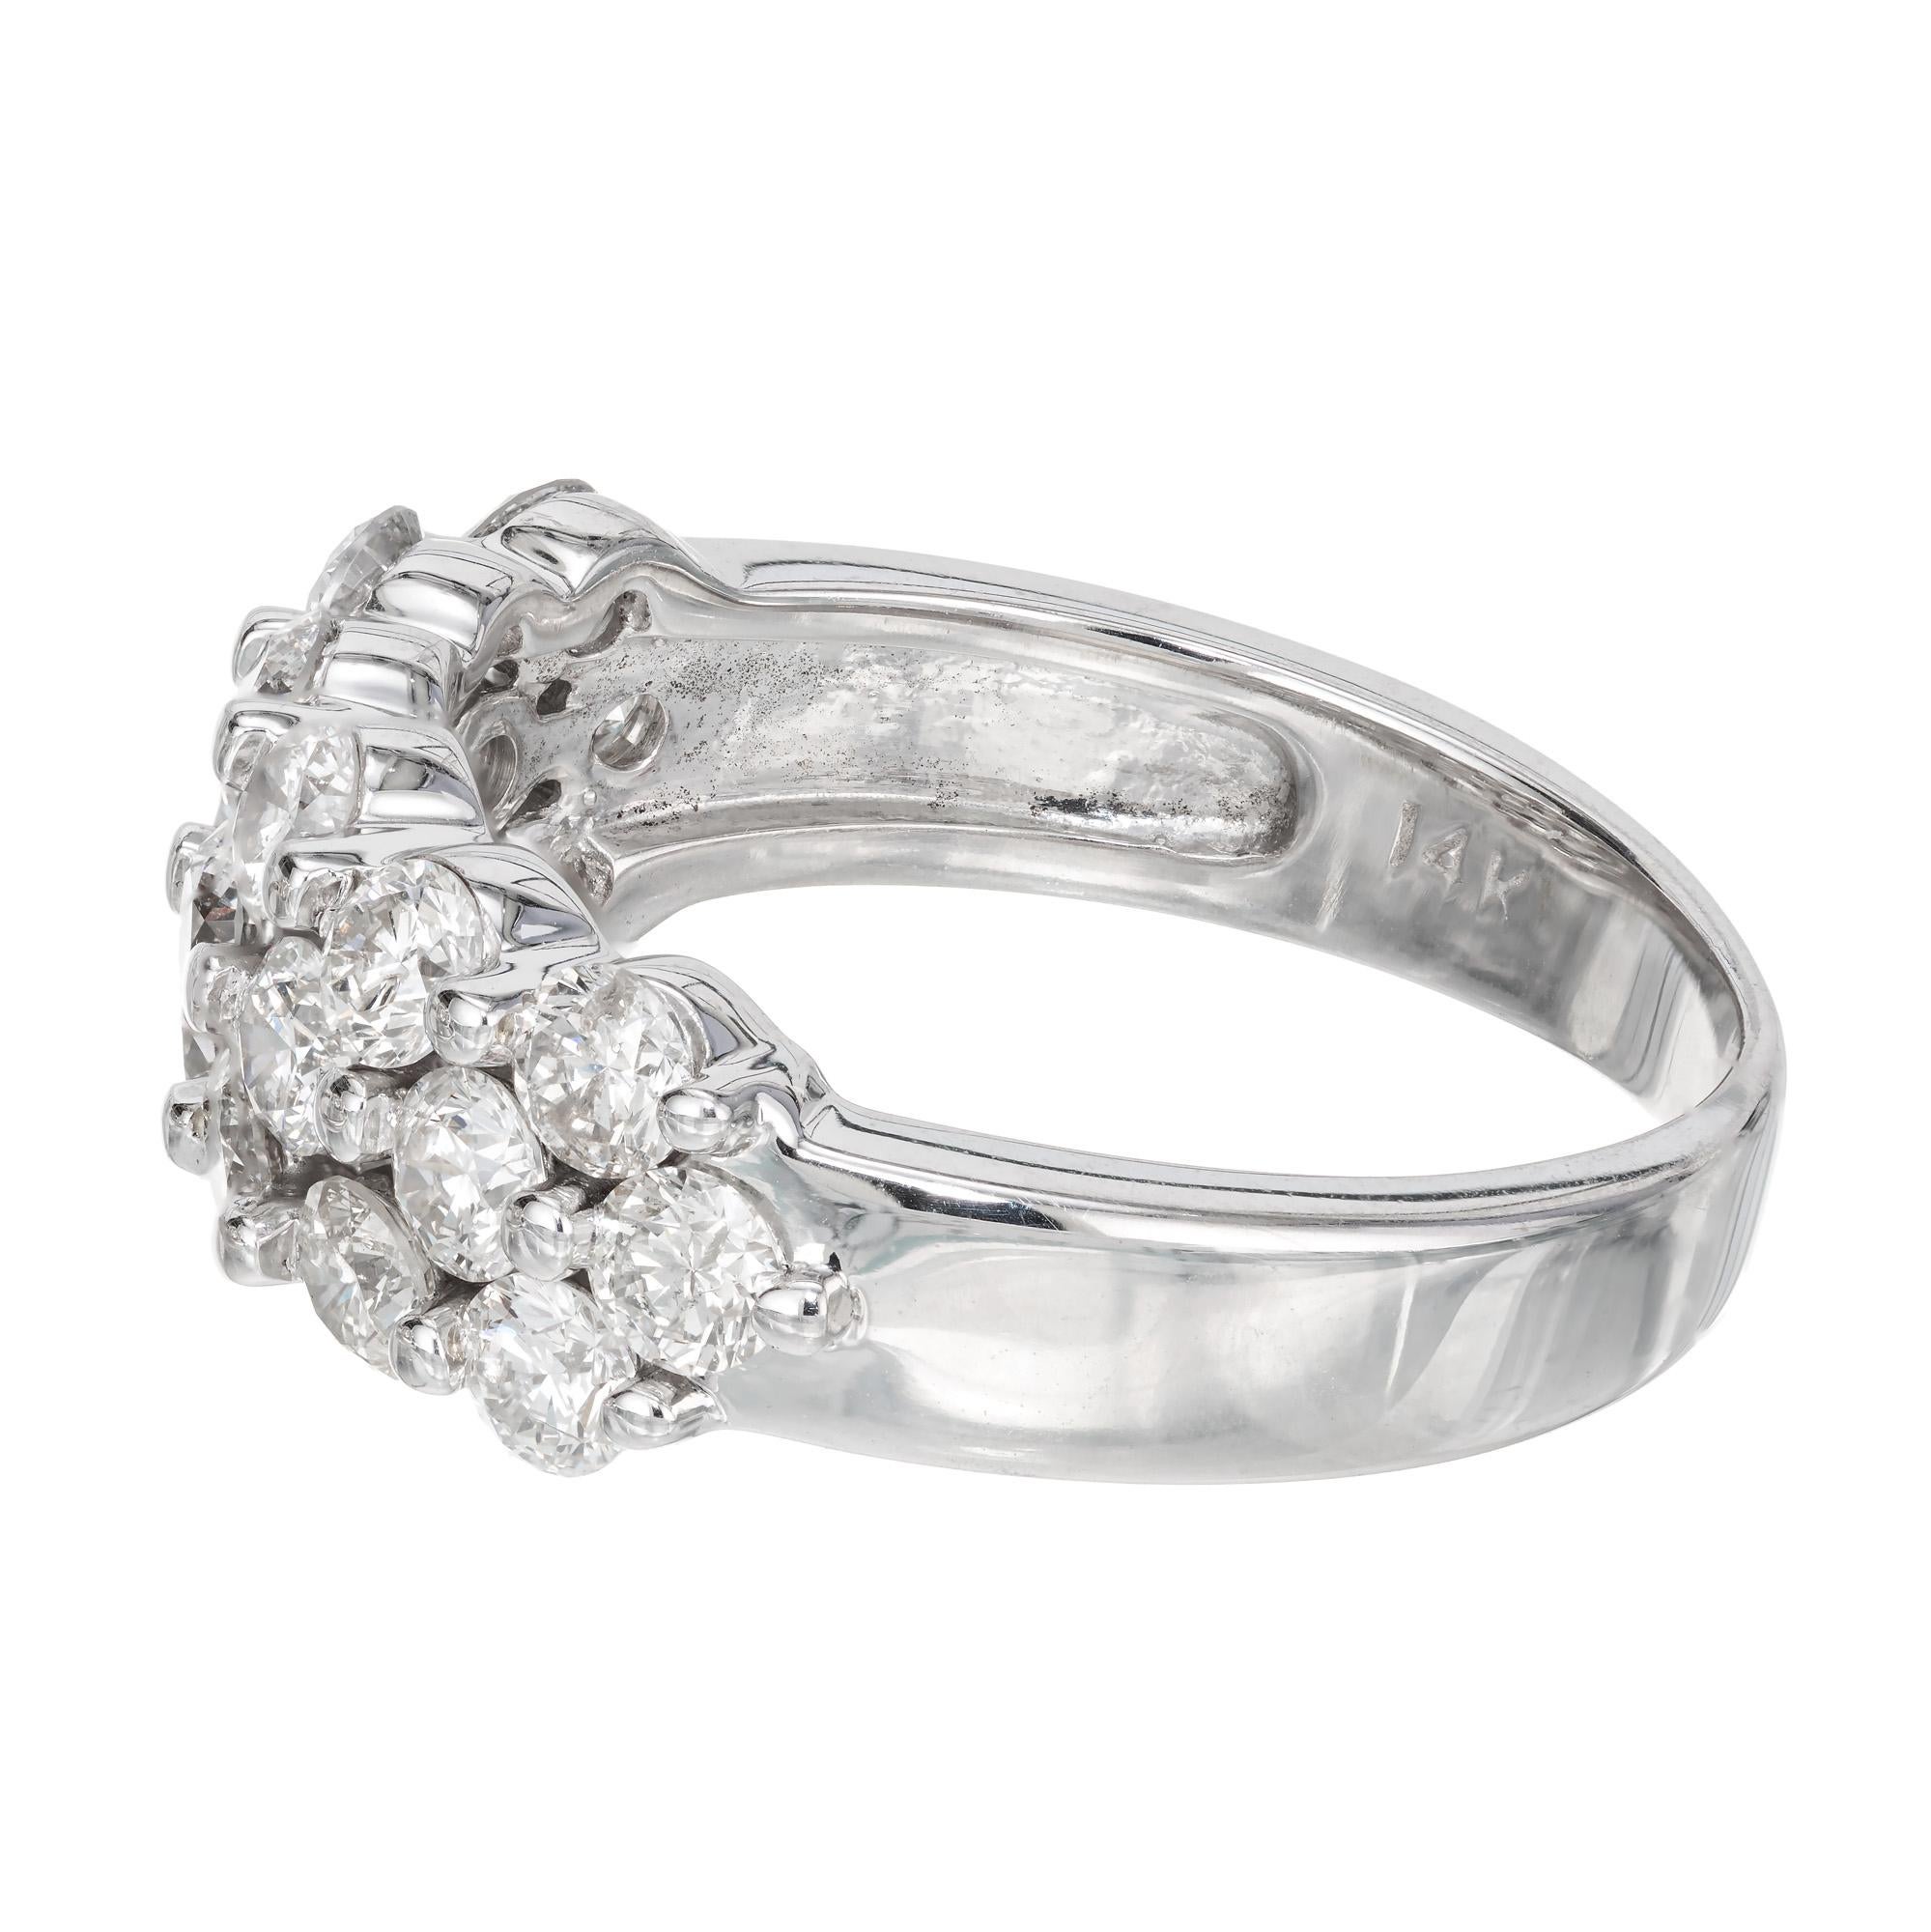 1.40 Carat Diamond White Gold Three Row Band Ring In Good Condition For Sale In Stamford, CT